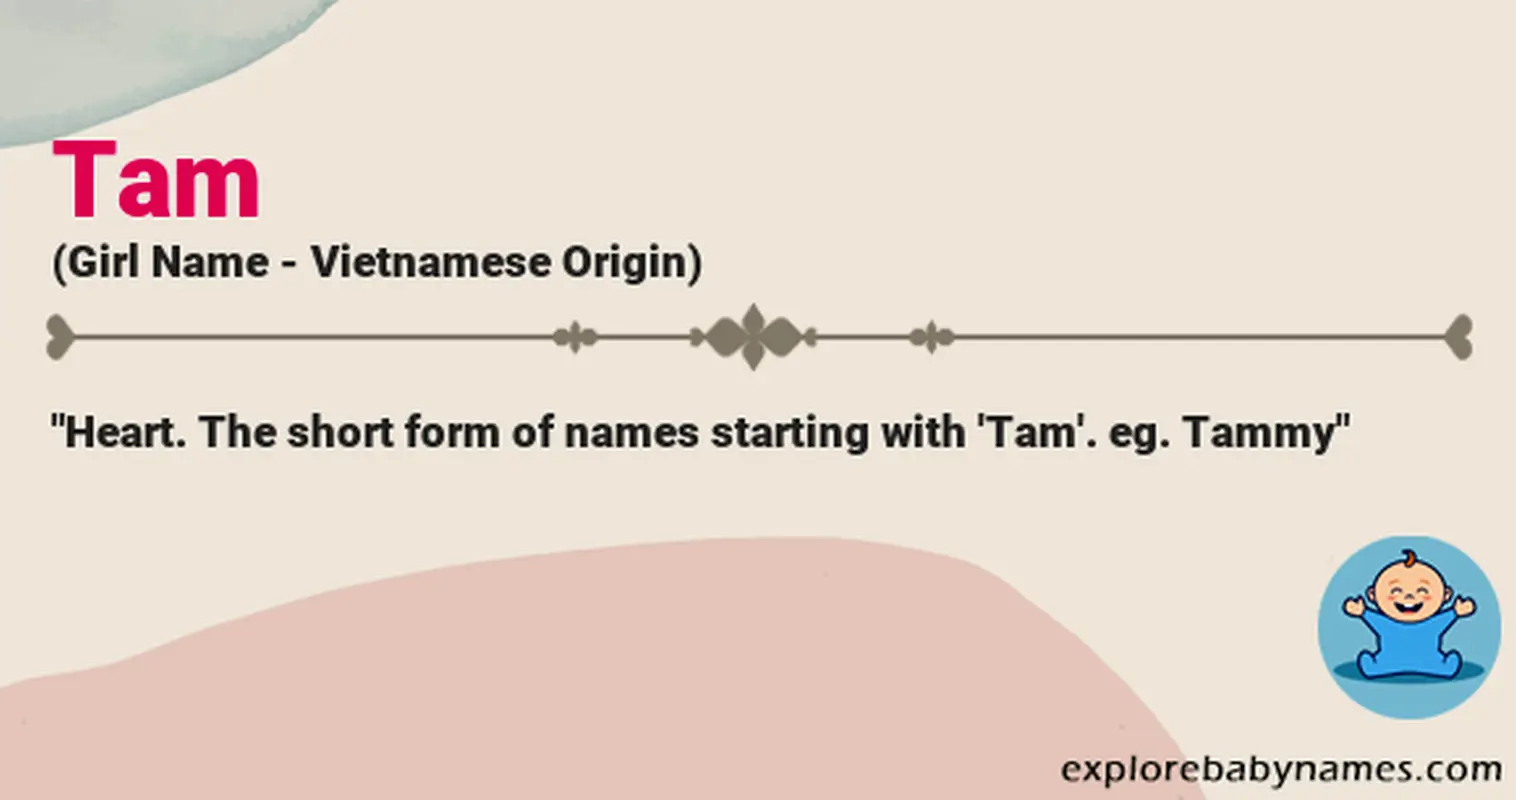 Meaning of Tam